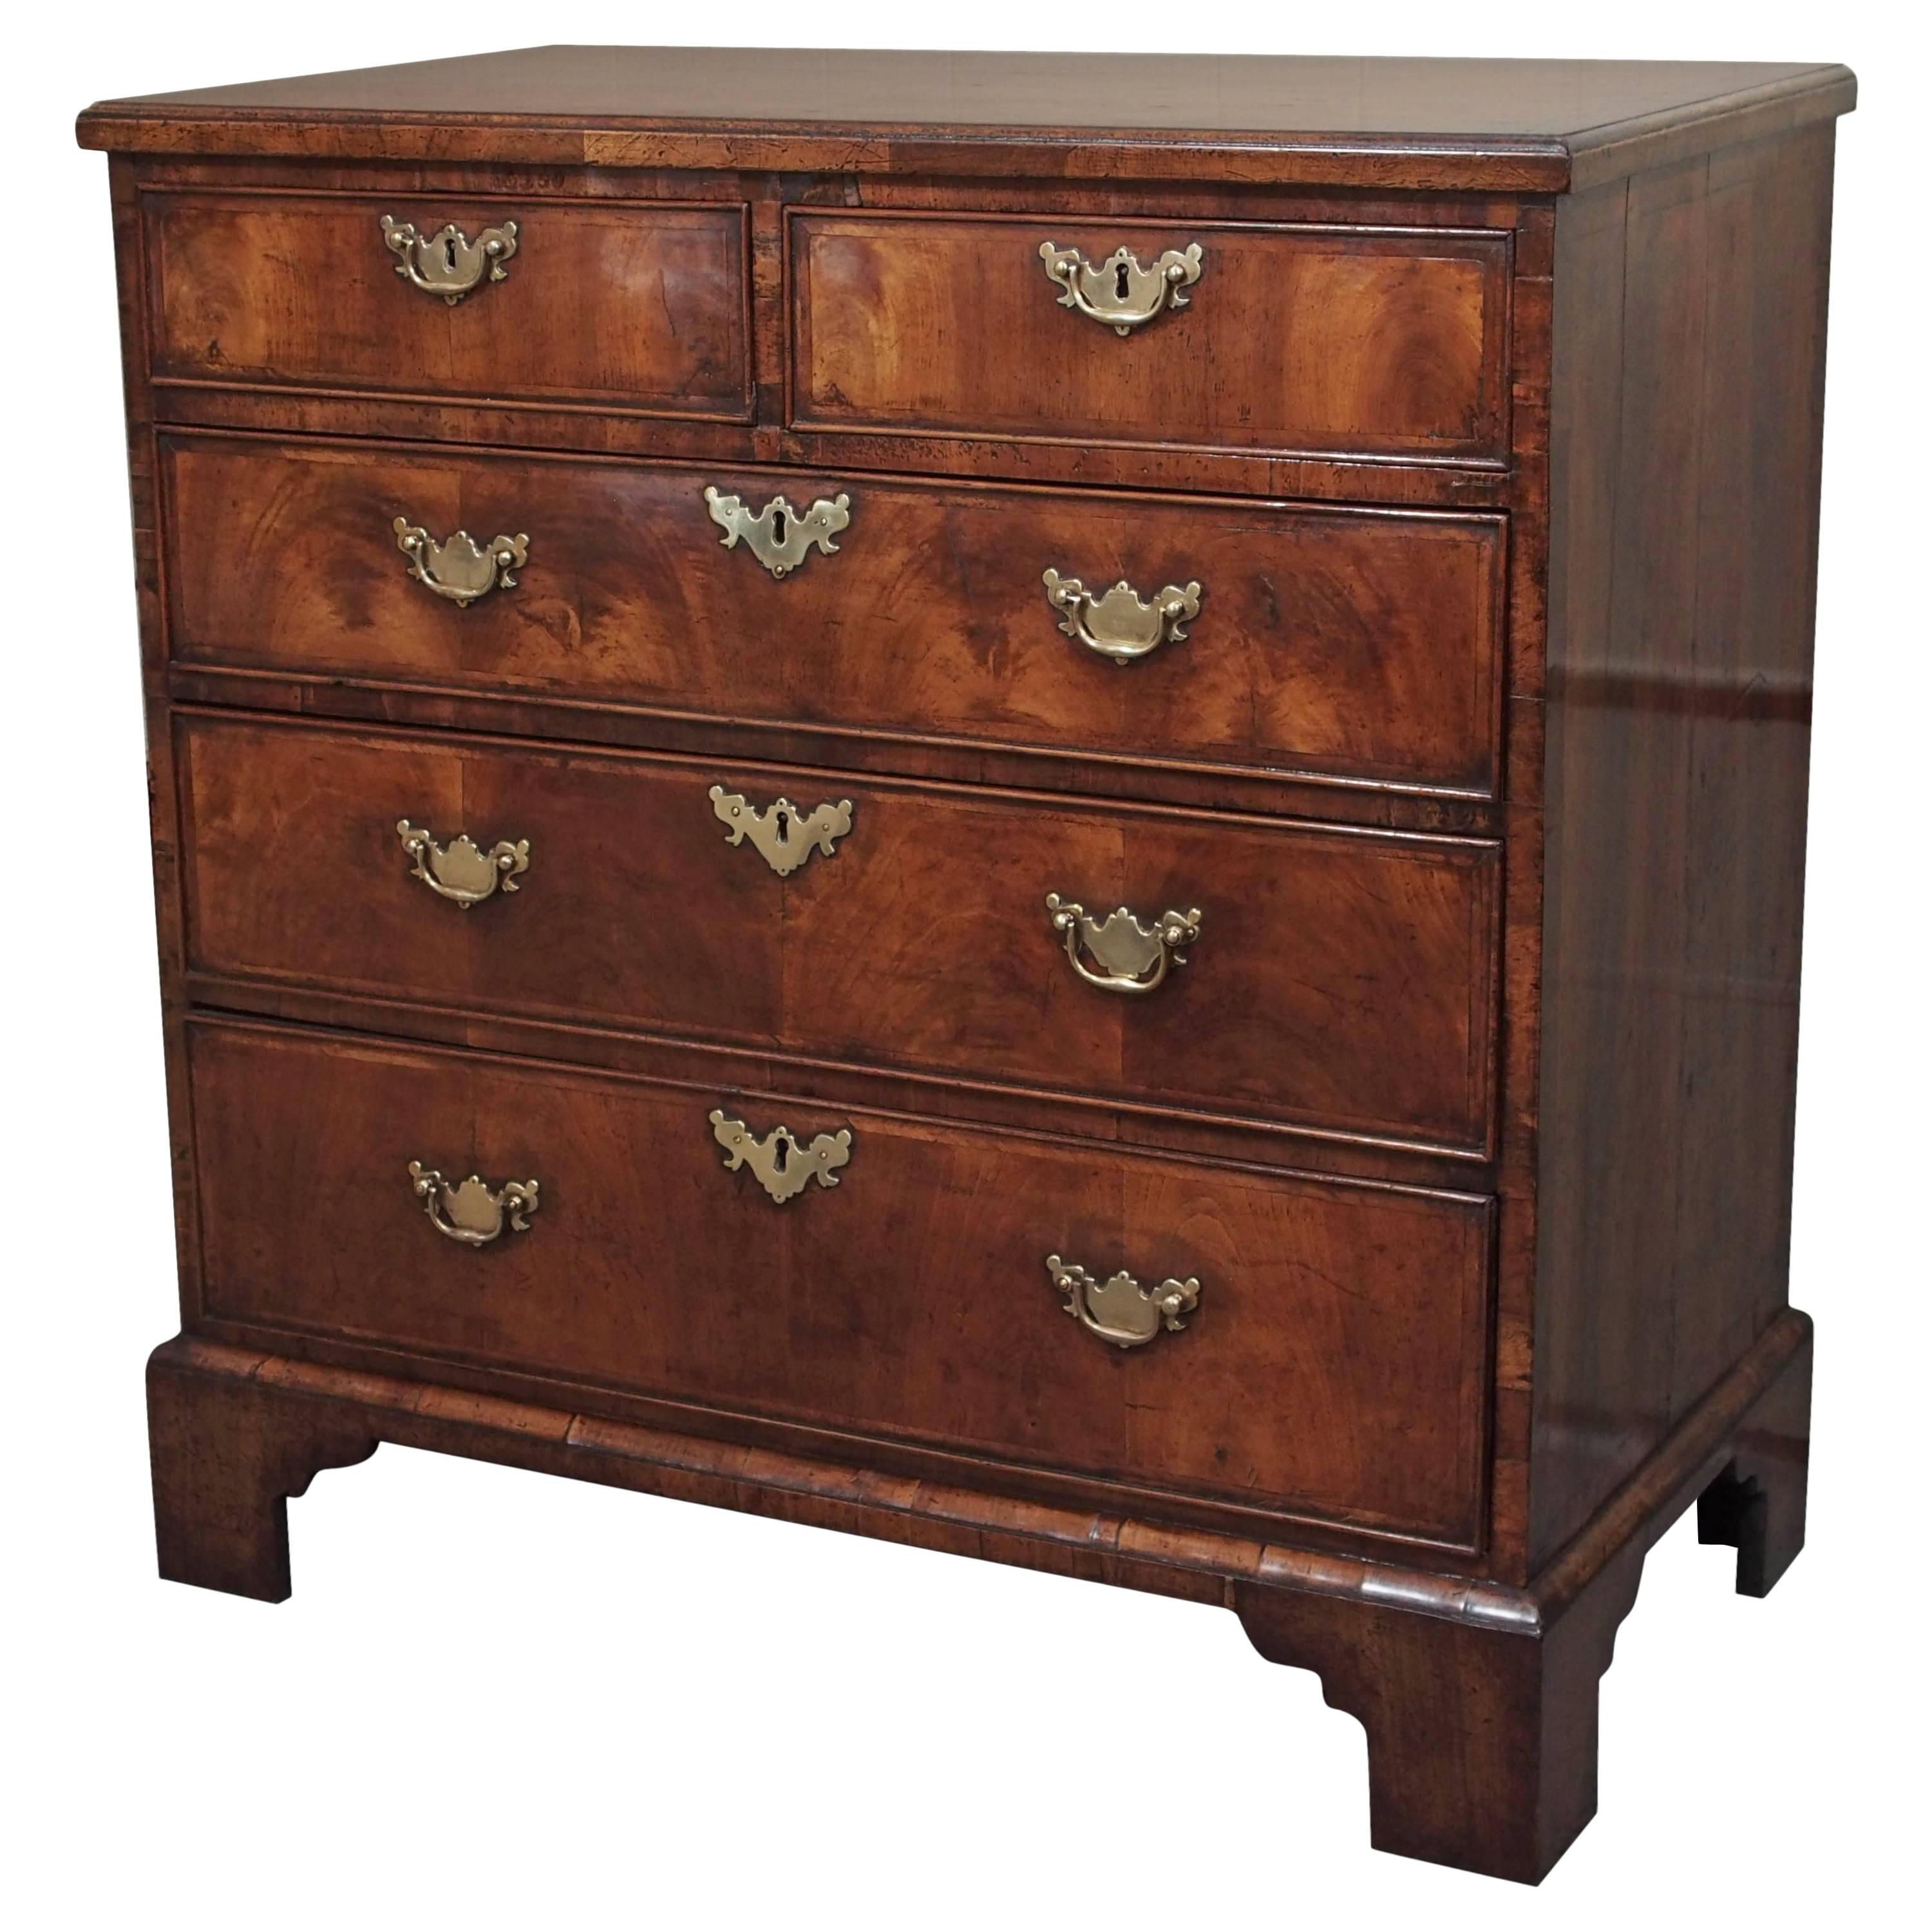 Early 18th Century Walnut Chest of Drawers